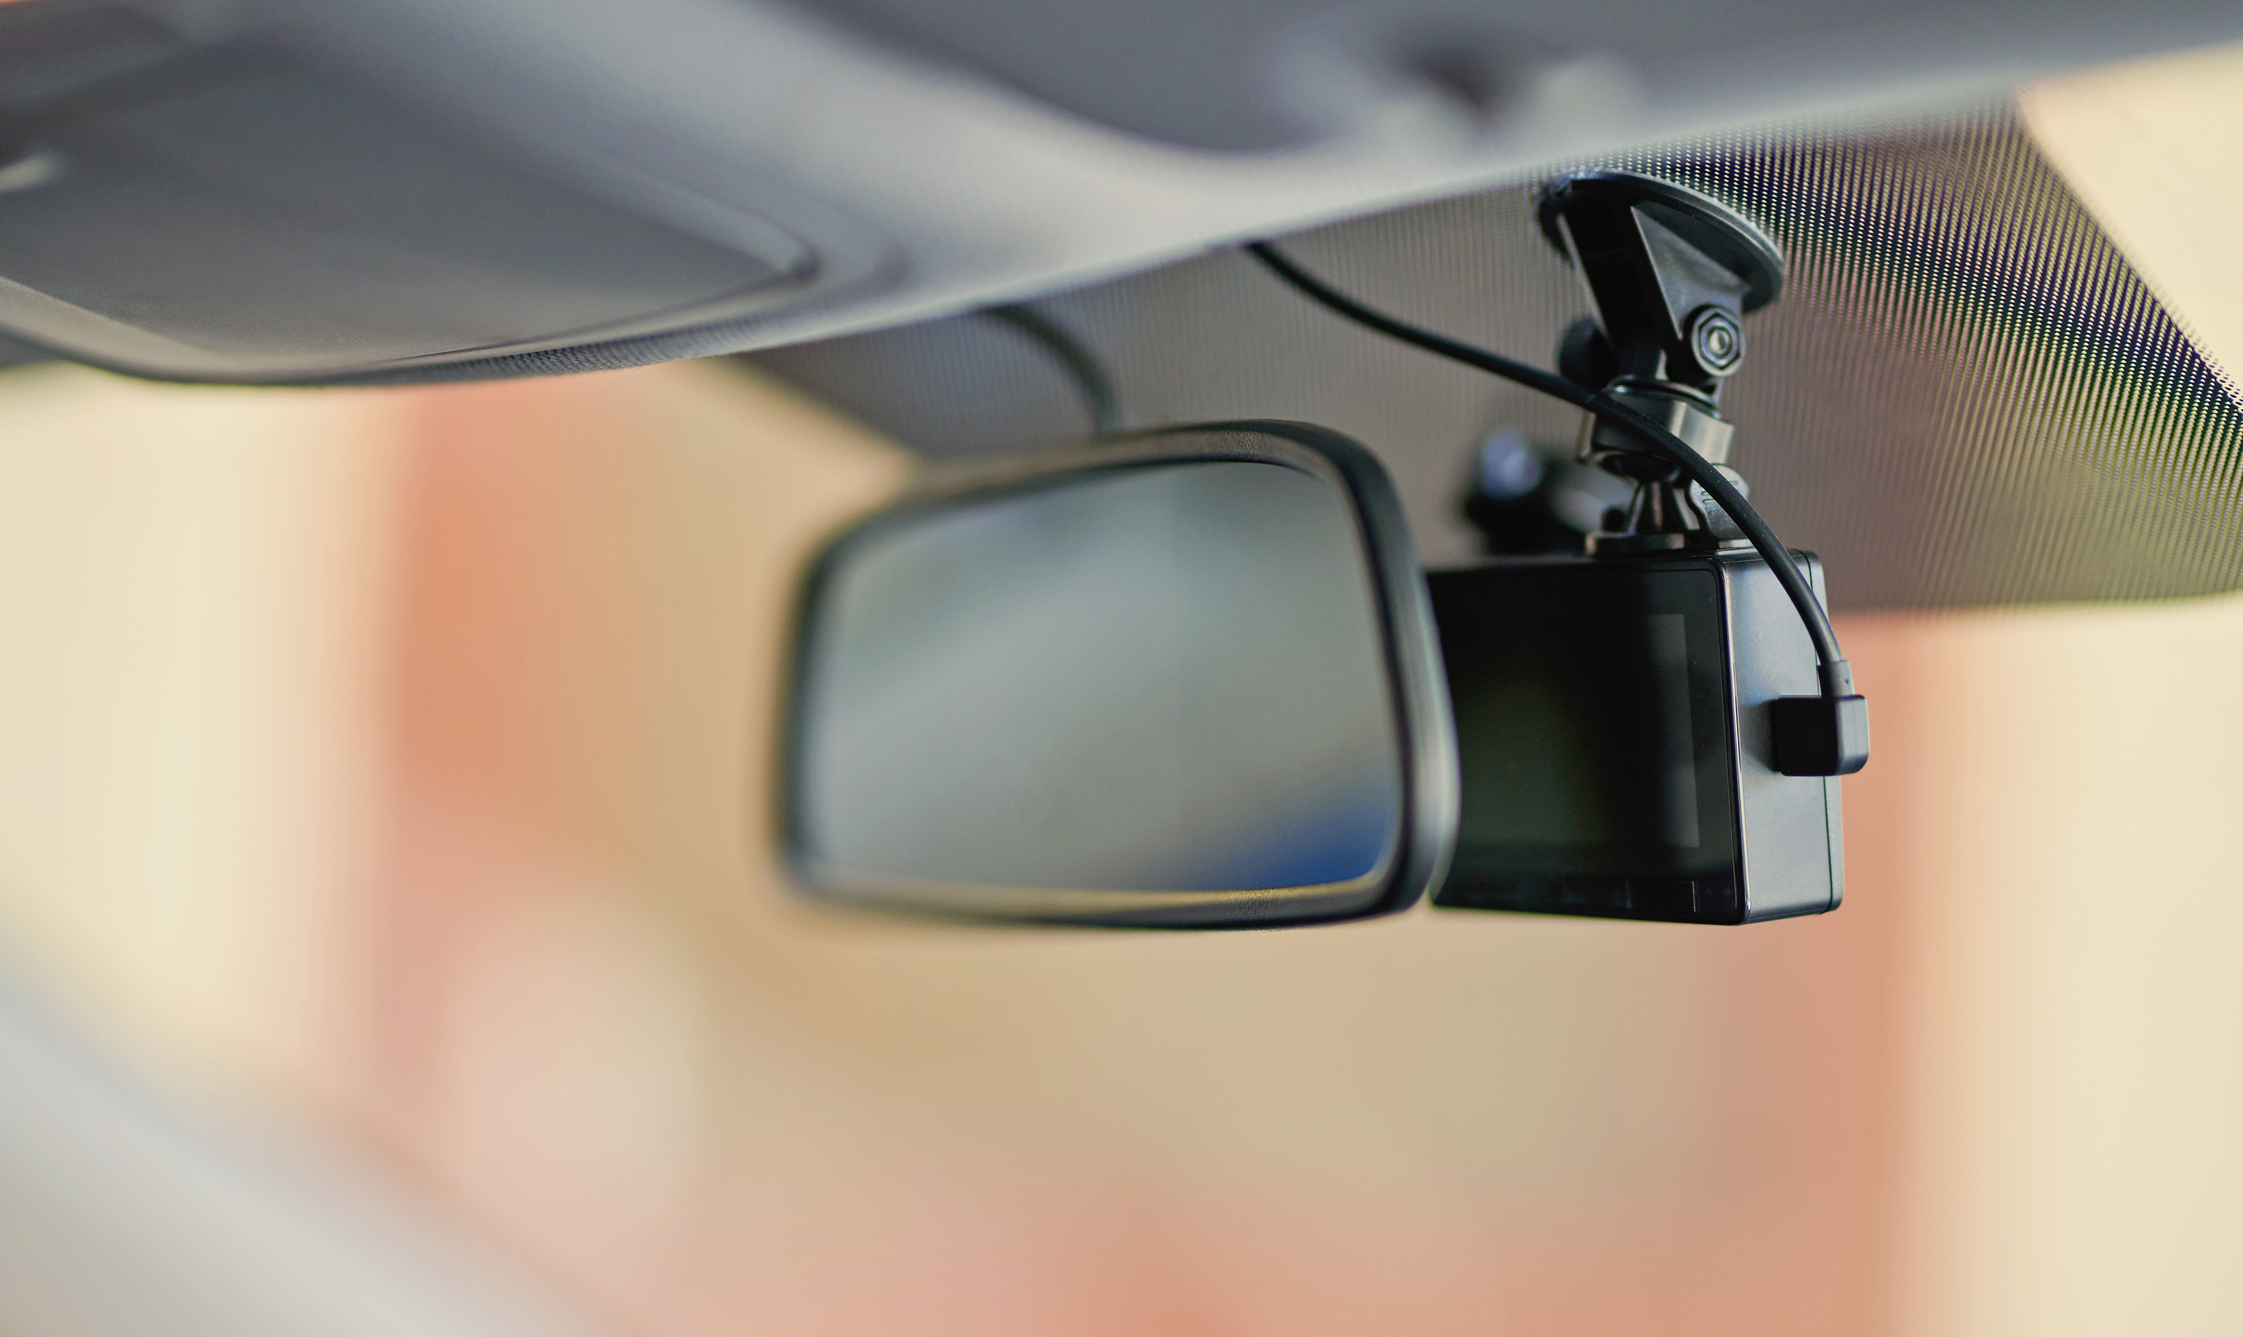 5 Benefits Of Having A Dashcam In Your Car